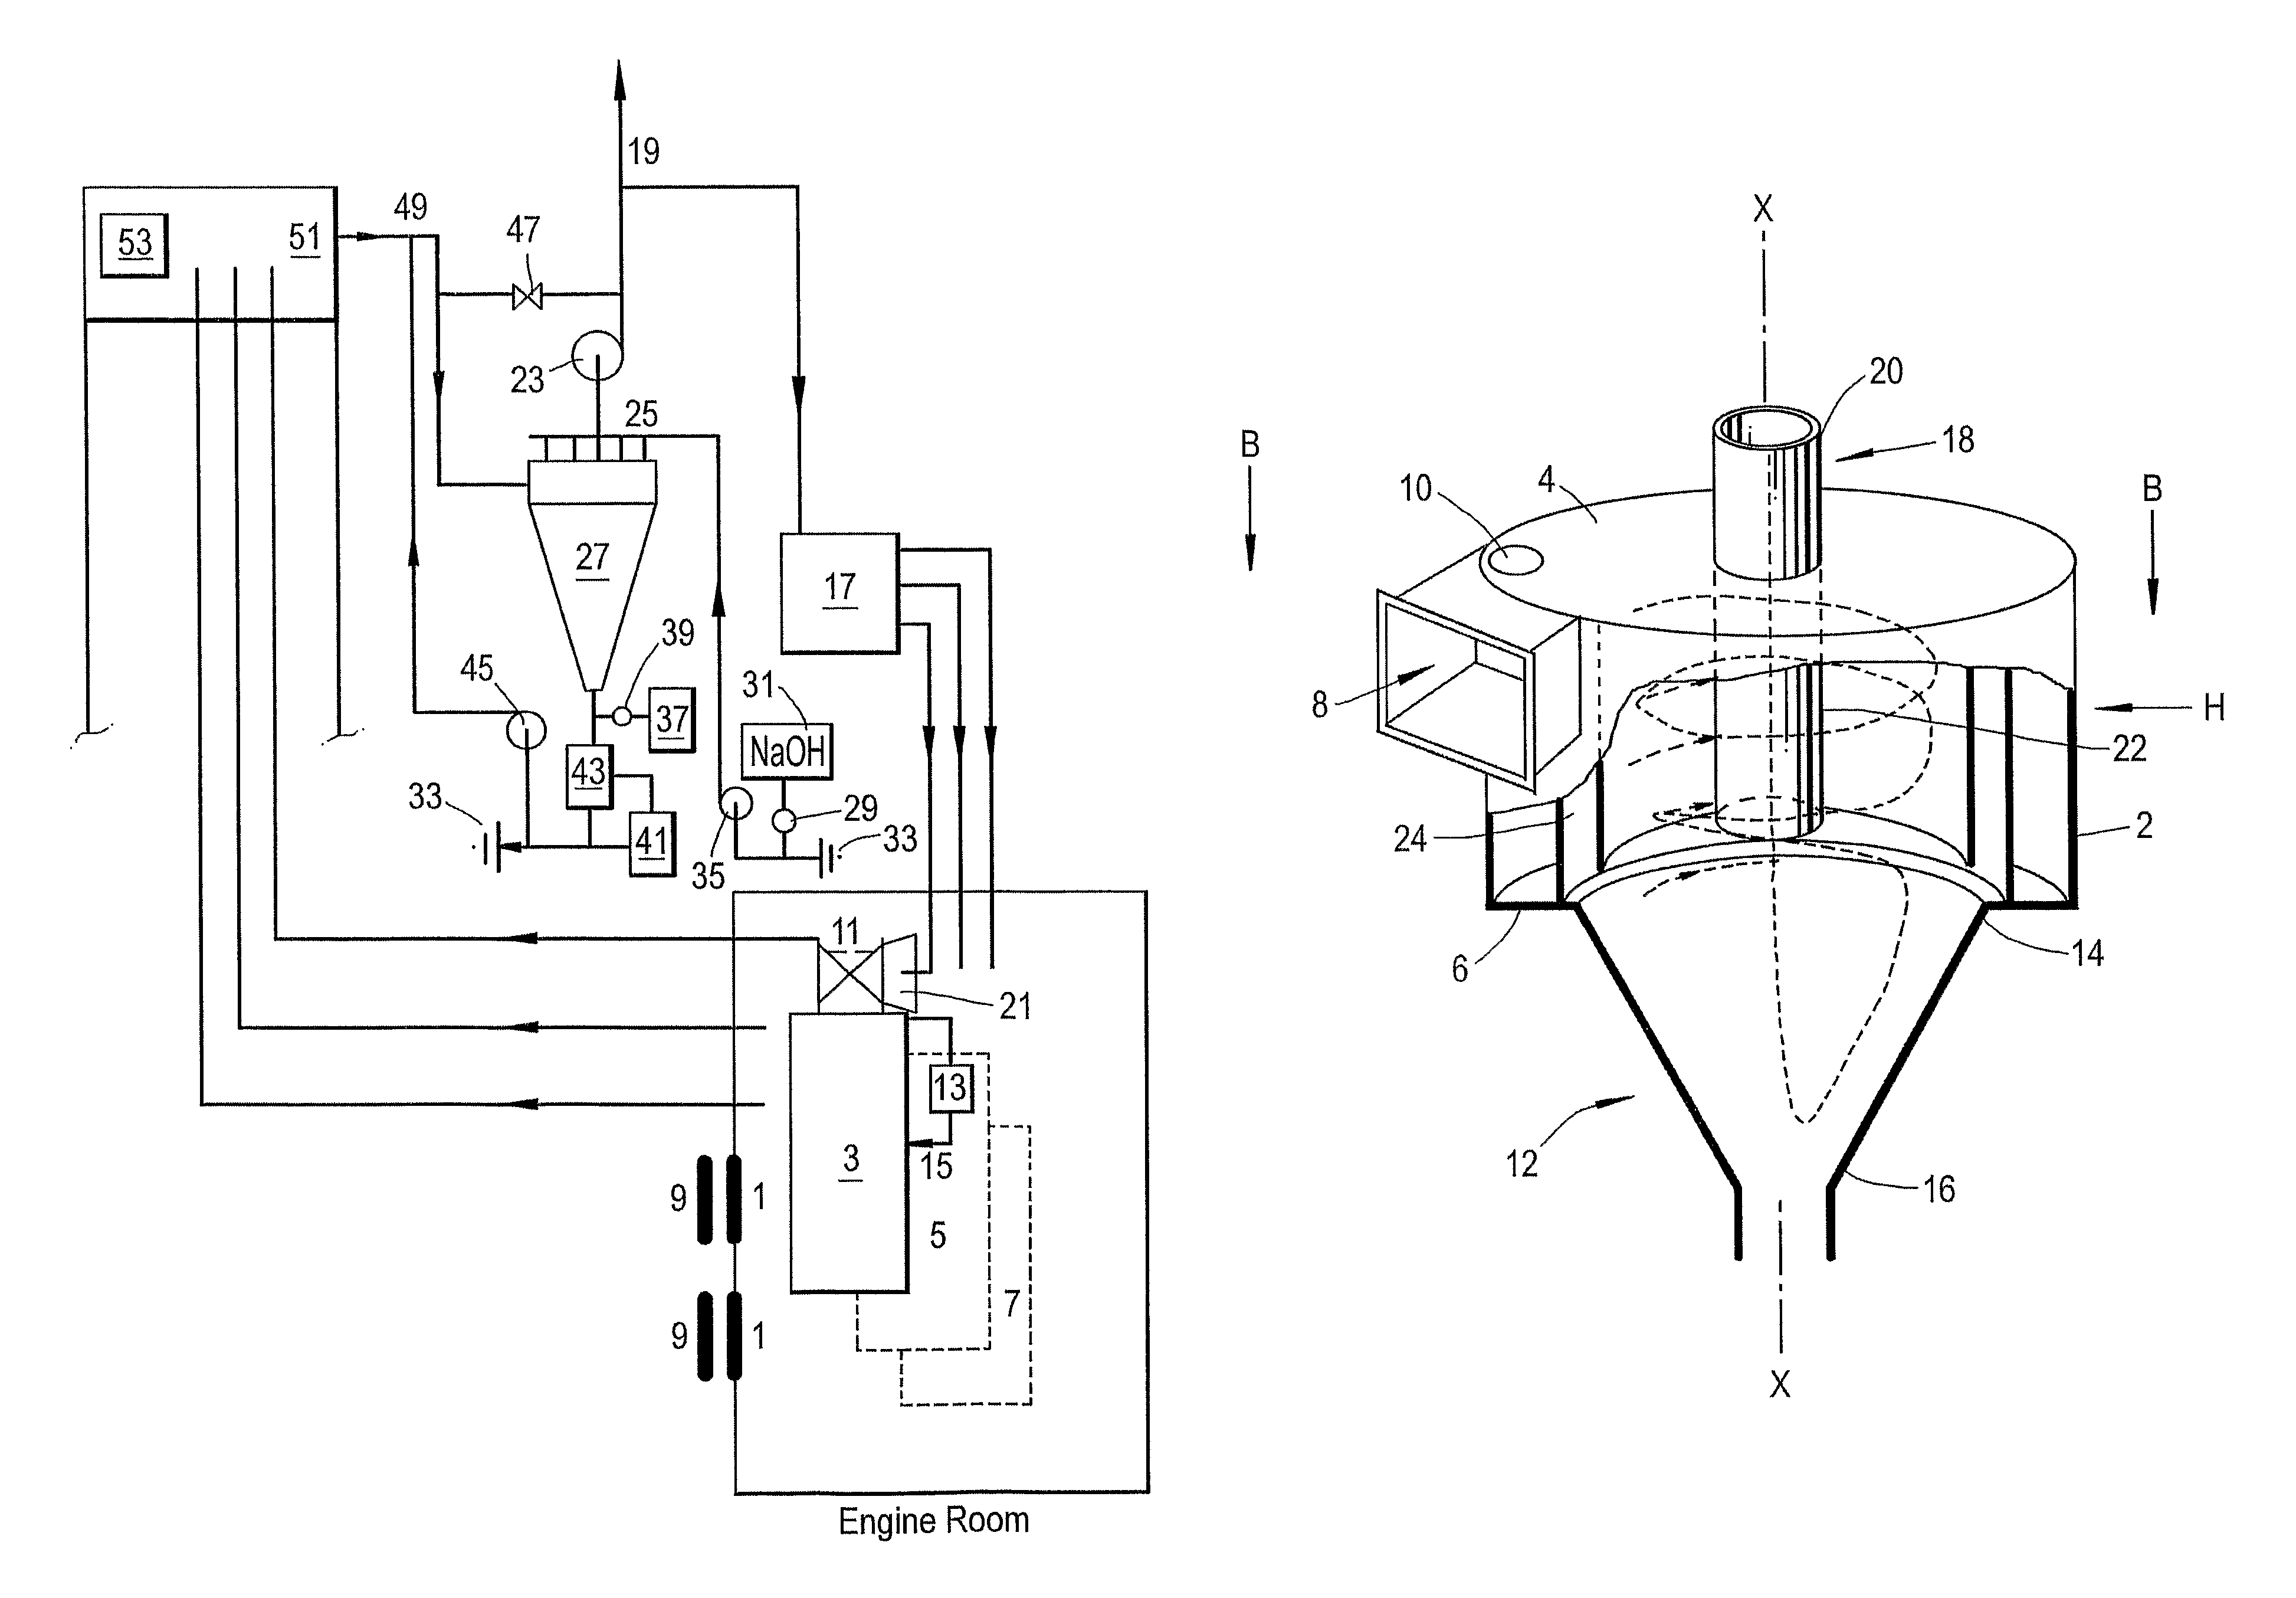 Methods and device for low contamination energy generation